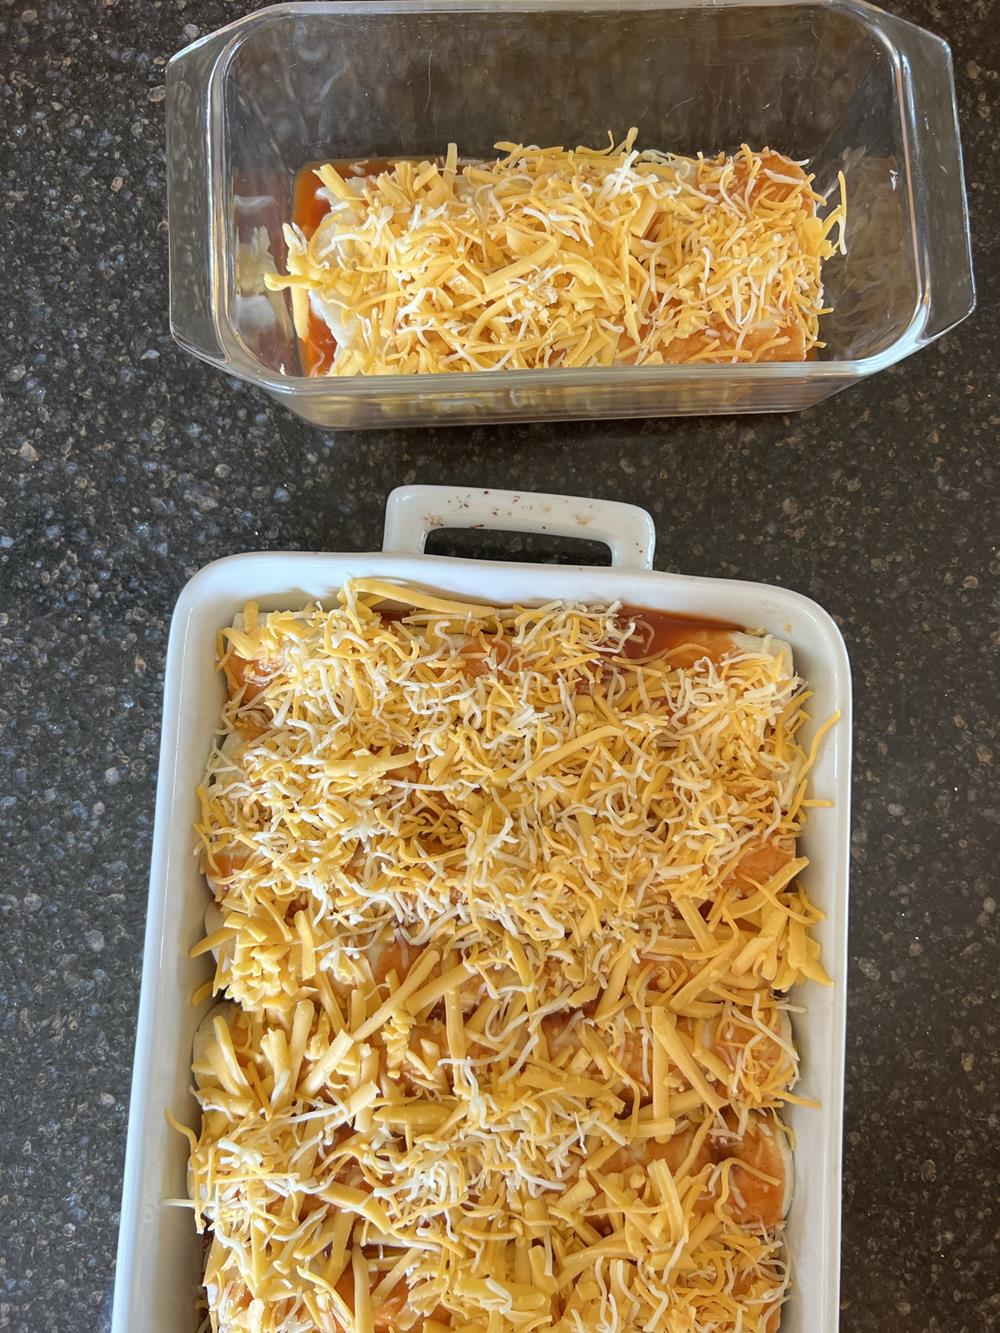 enchiladas in two pans one glass and one white